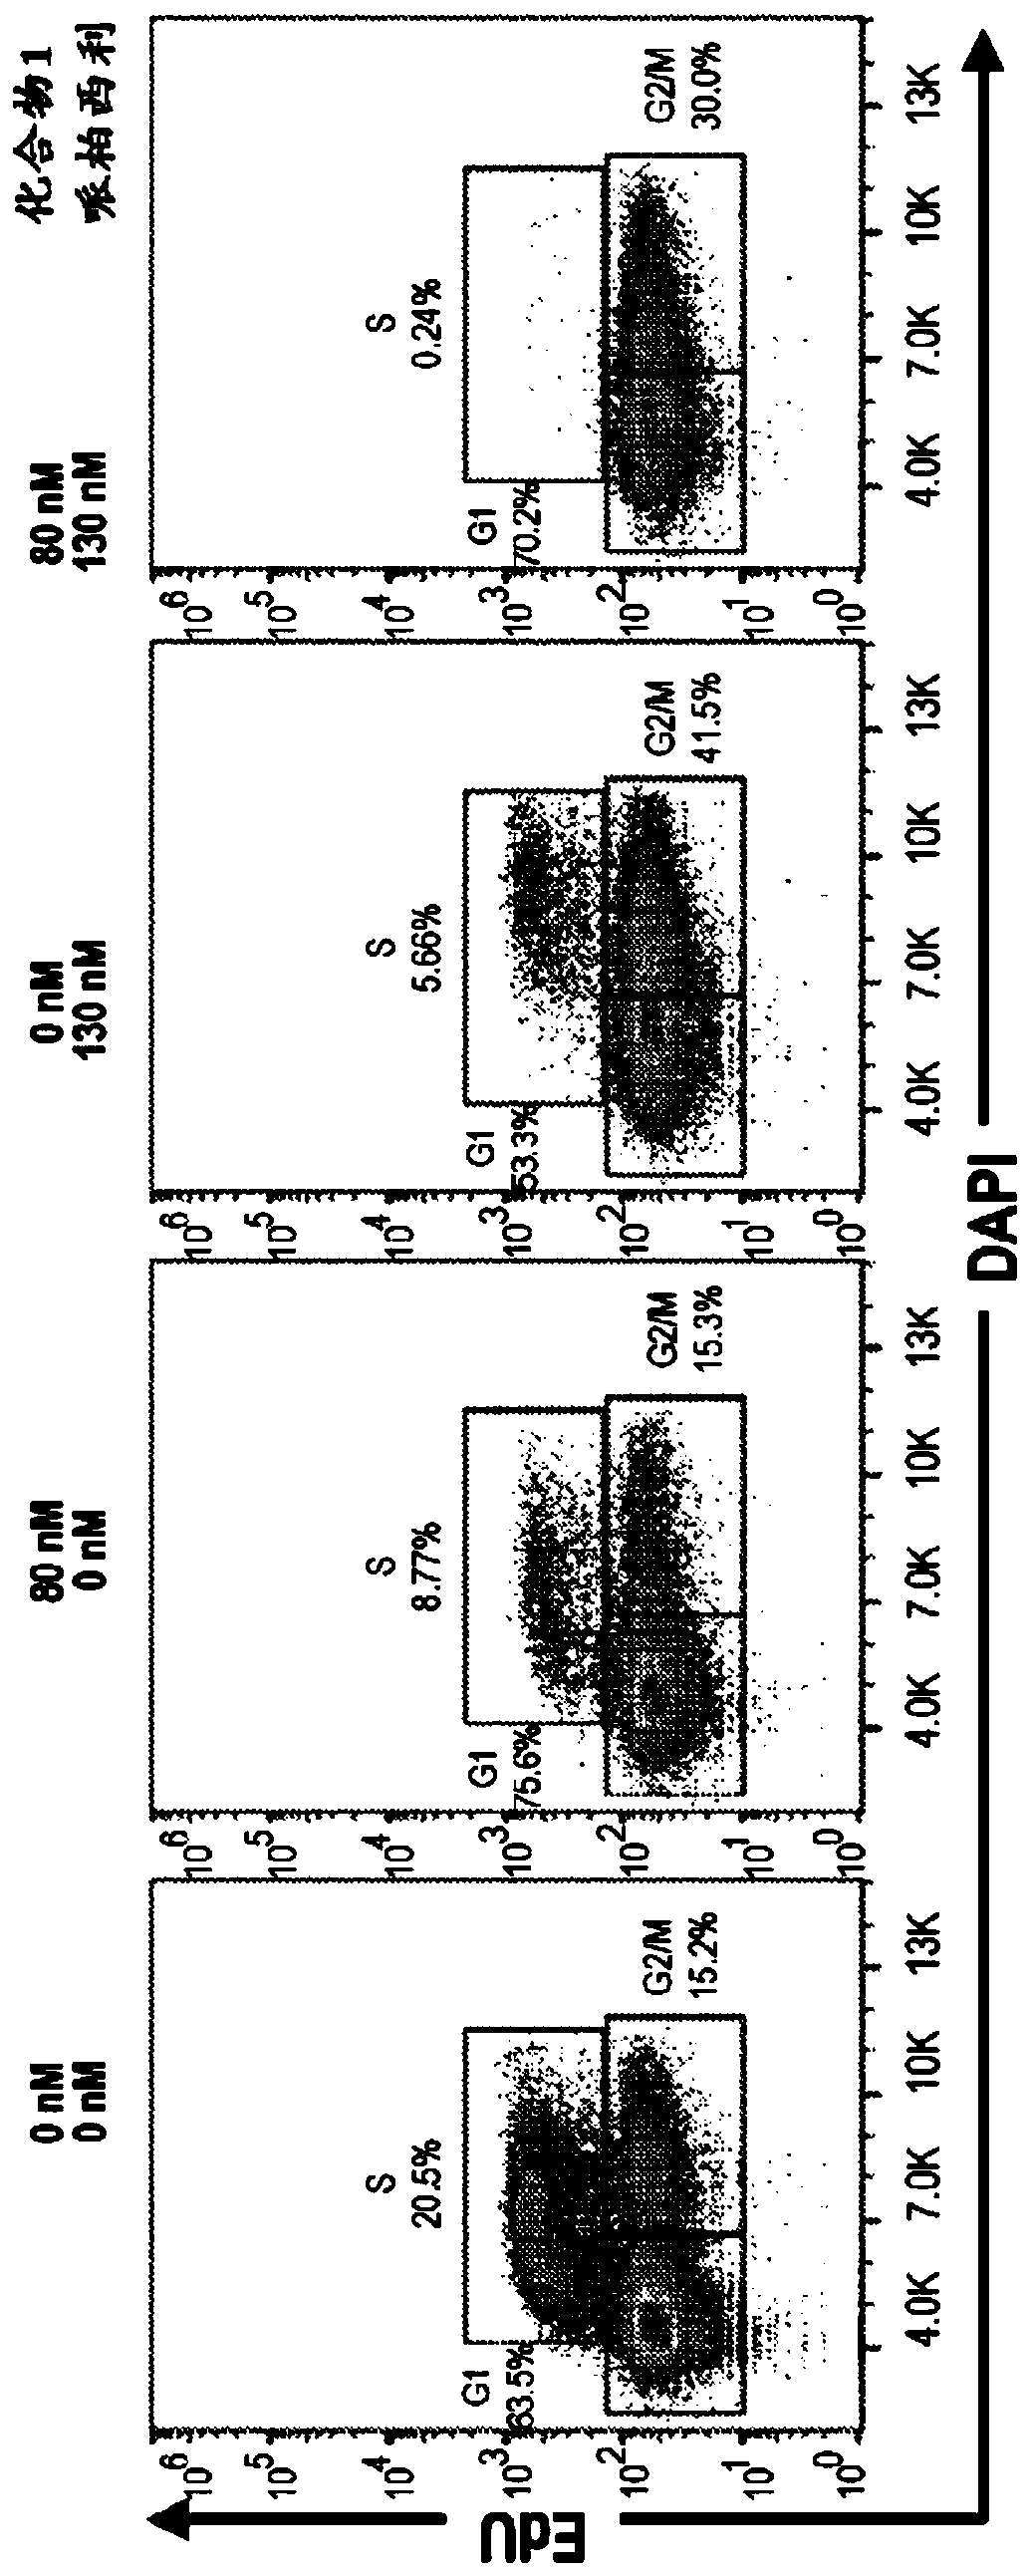 Inhibitors of the fibroblast growth factor receptor in combination with cyclin-dependent kinase inhibitors